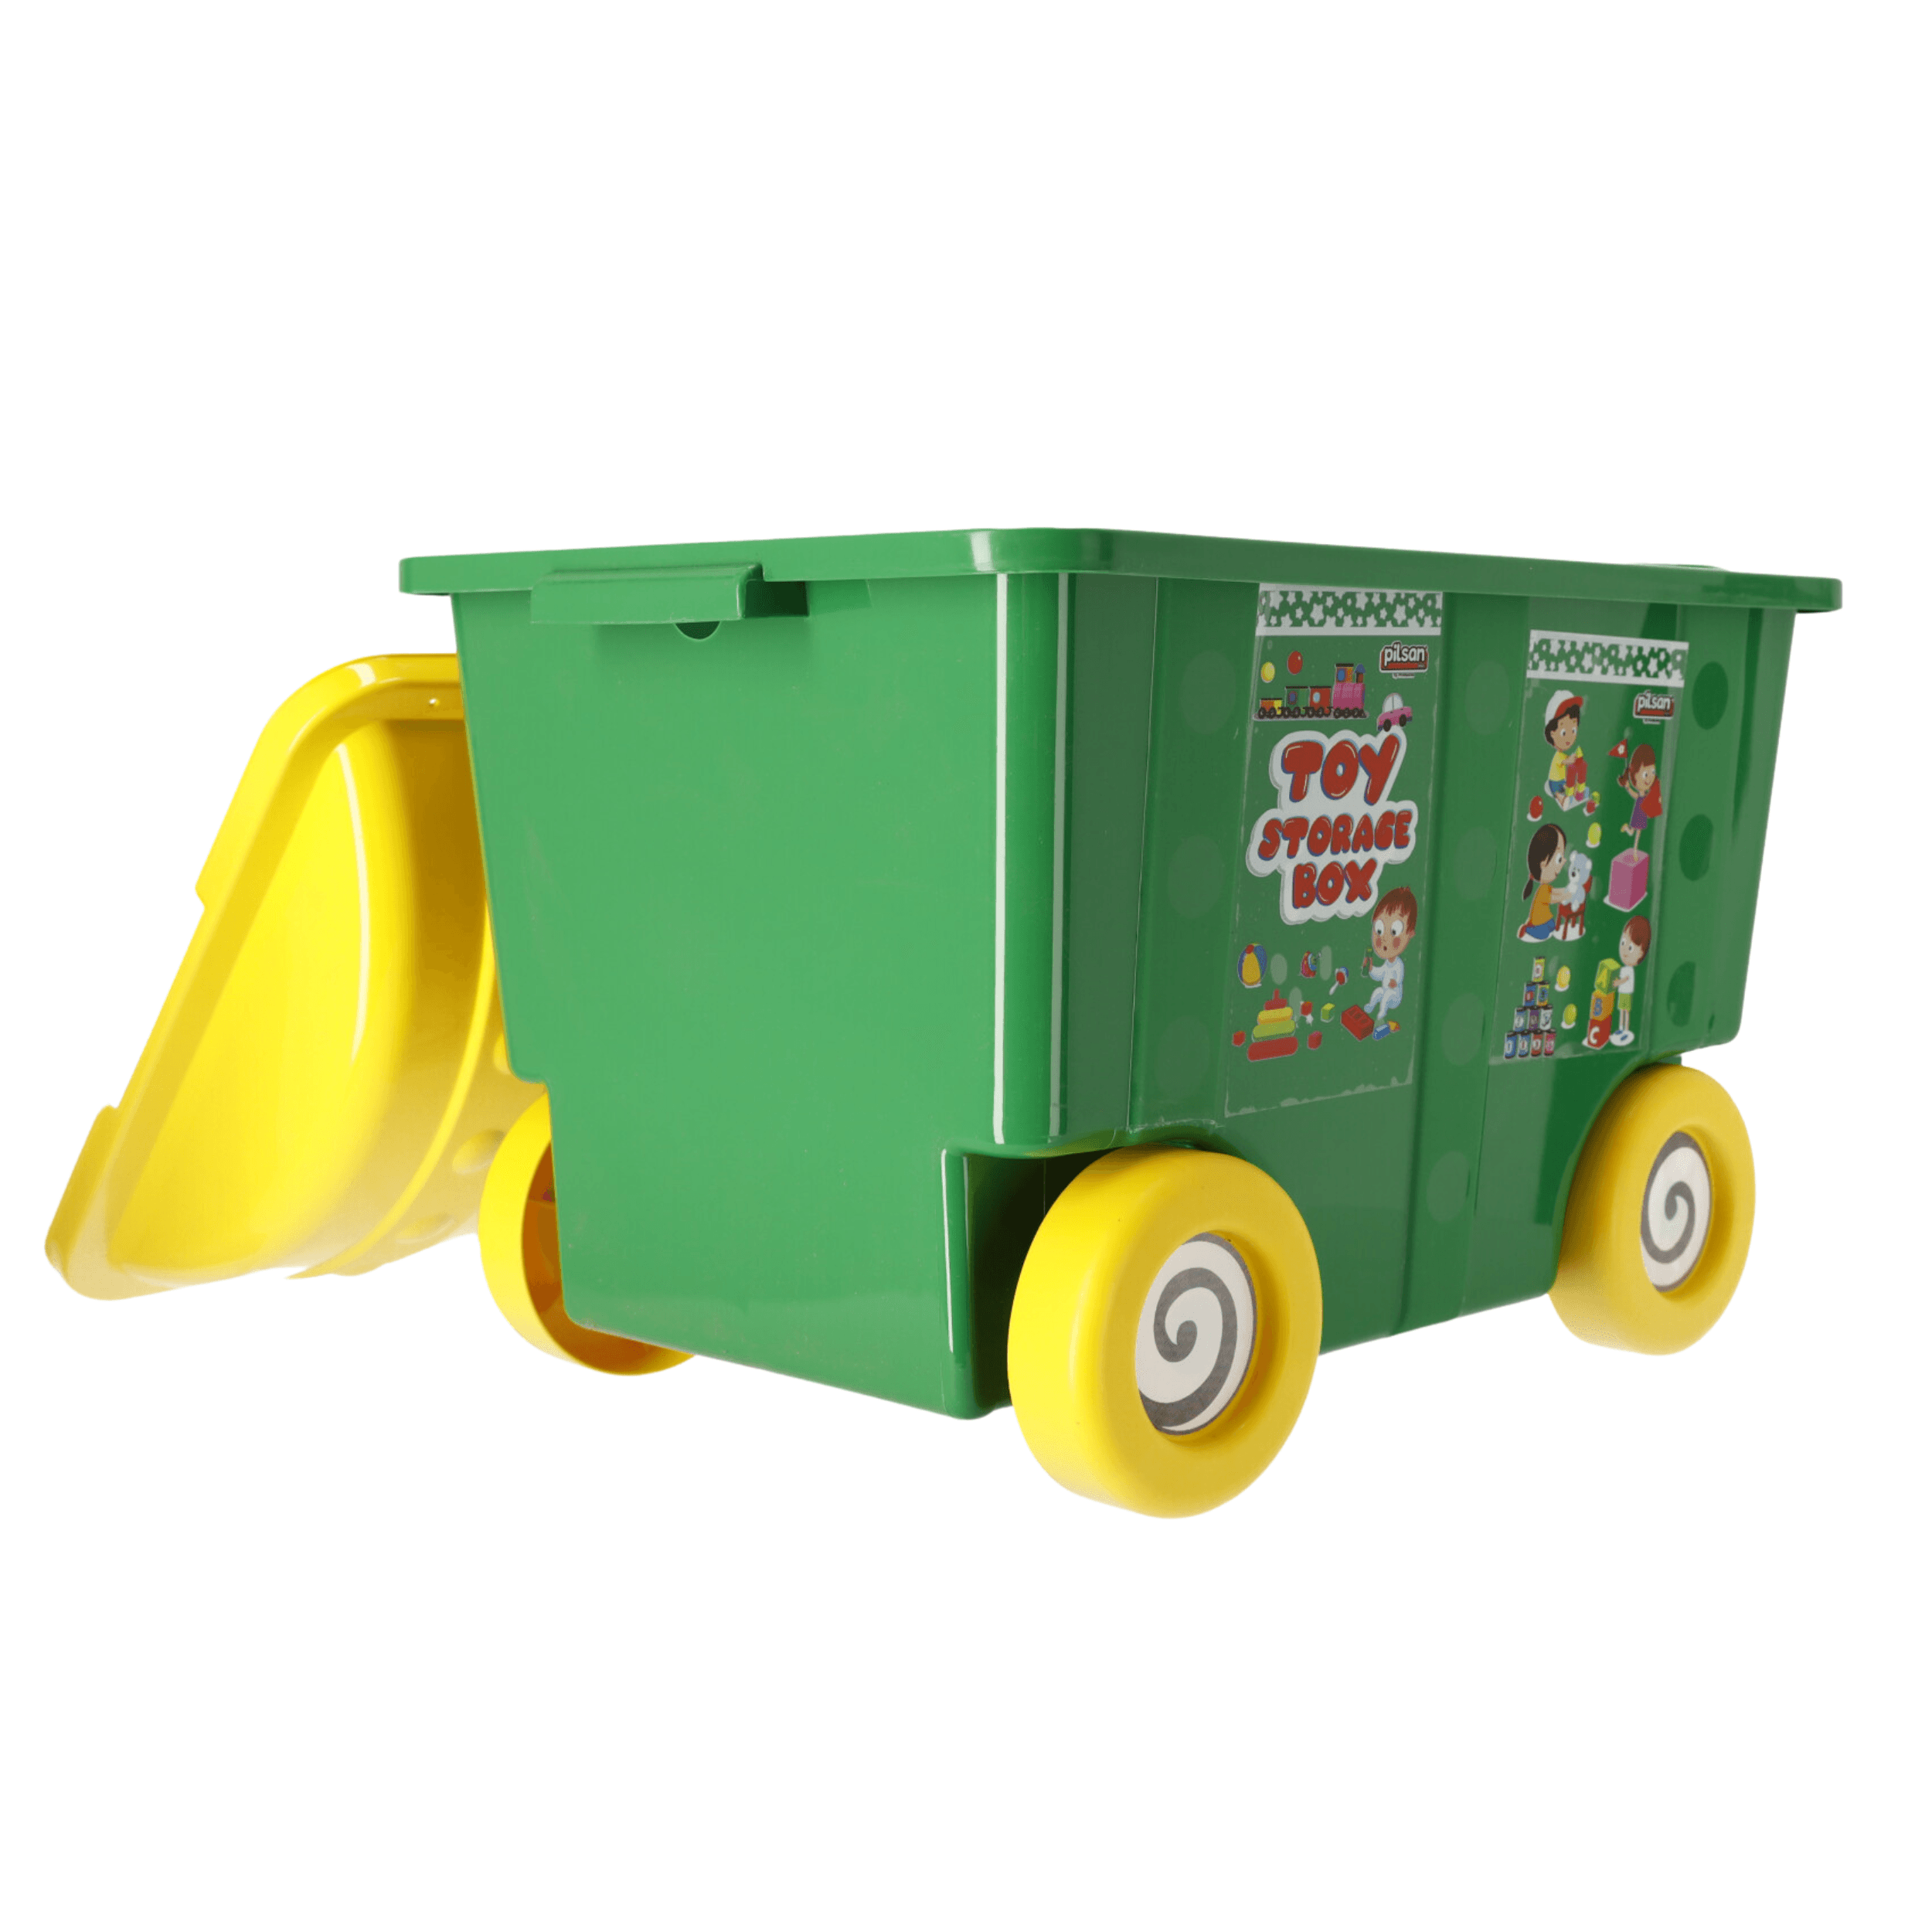 Pilsan Toy Container on Wheels - green